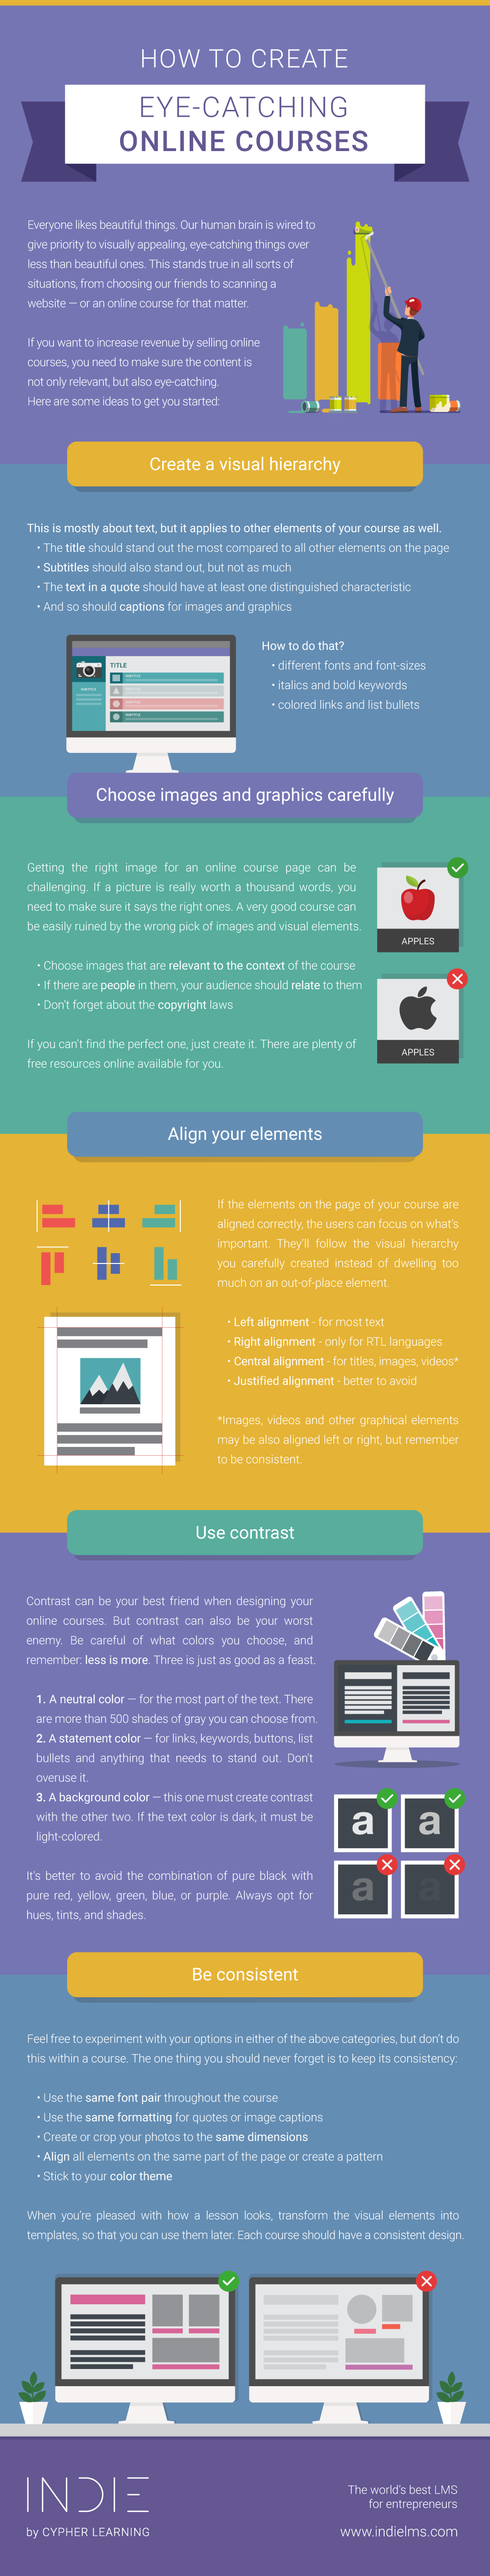 how-to-create-eye-catching-online-courses infographic | Entrepreneurs Blog